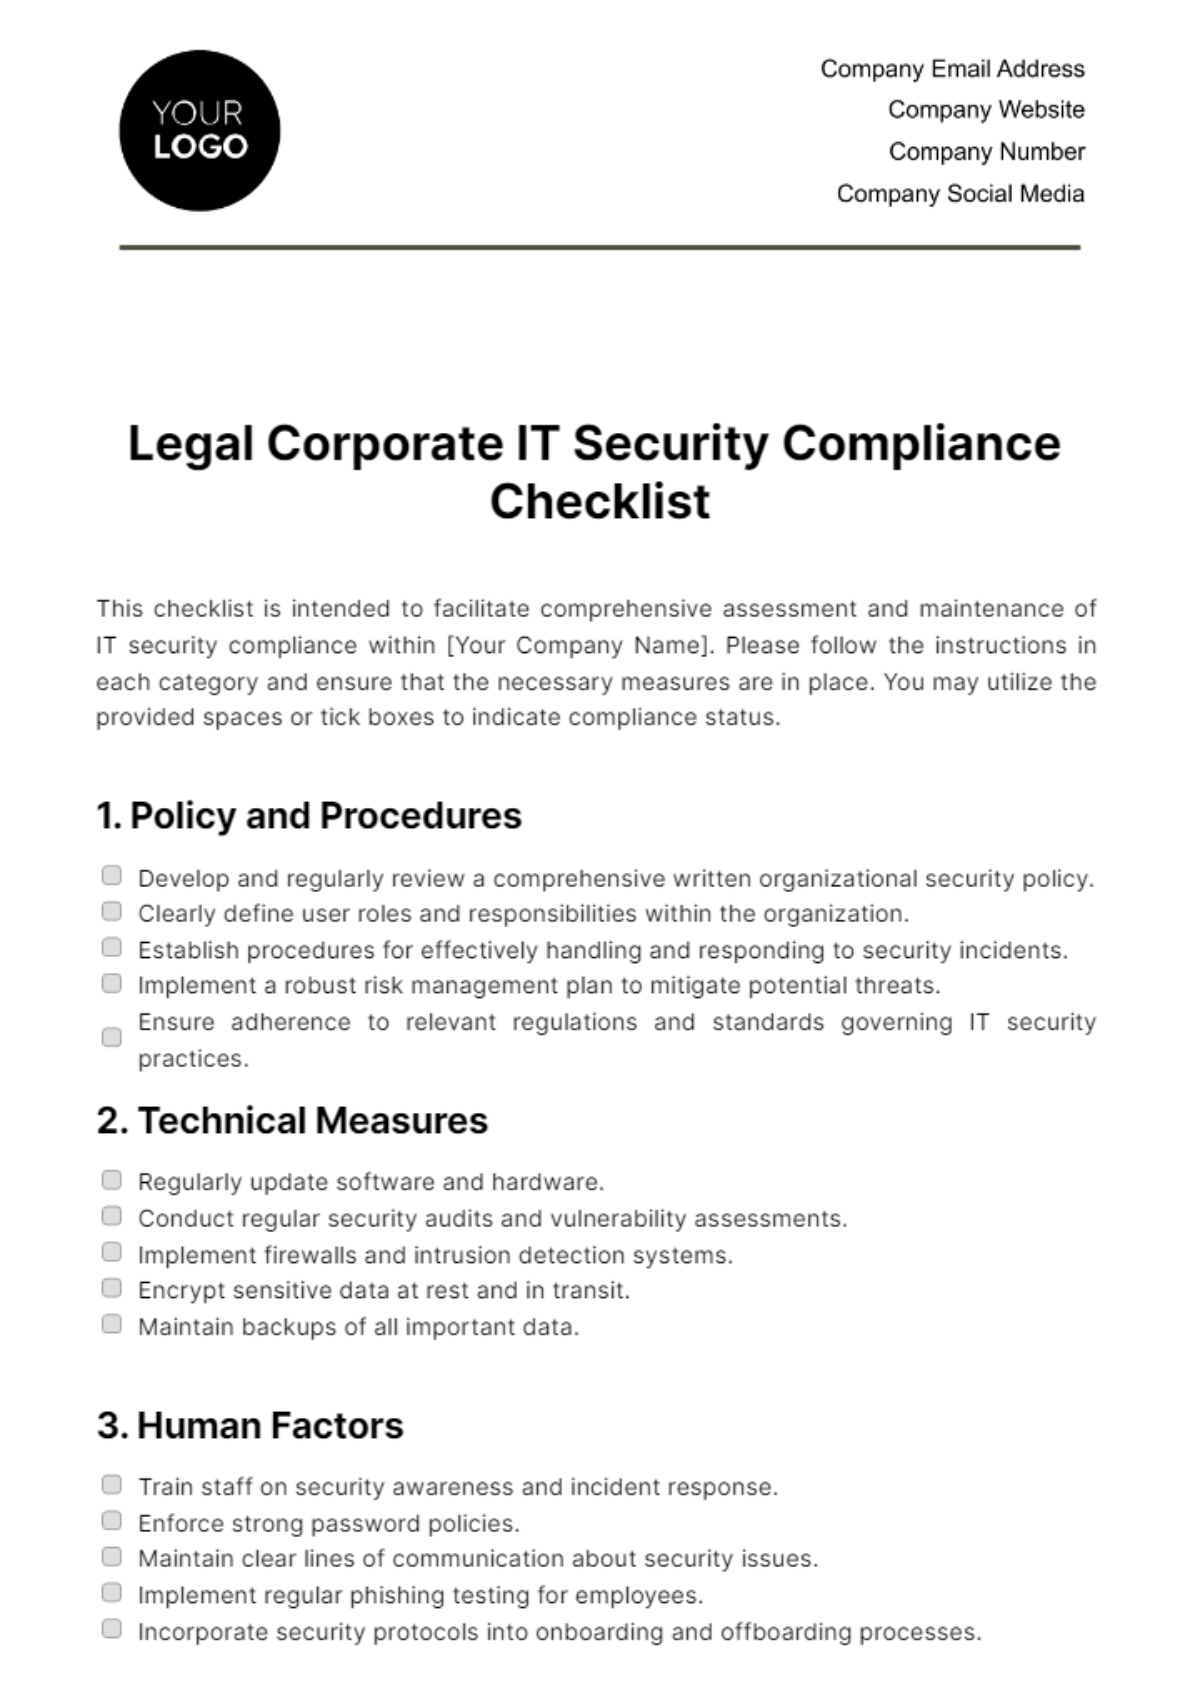 Free Legal Corporate IT Security Compliance Checklist Template